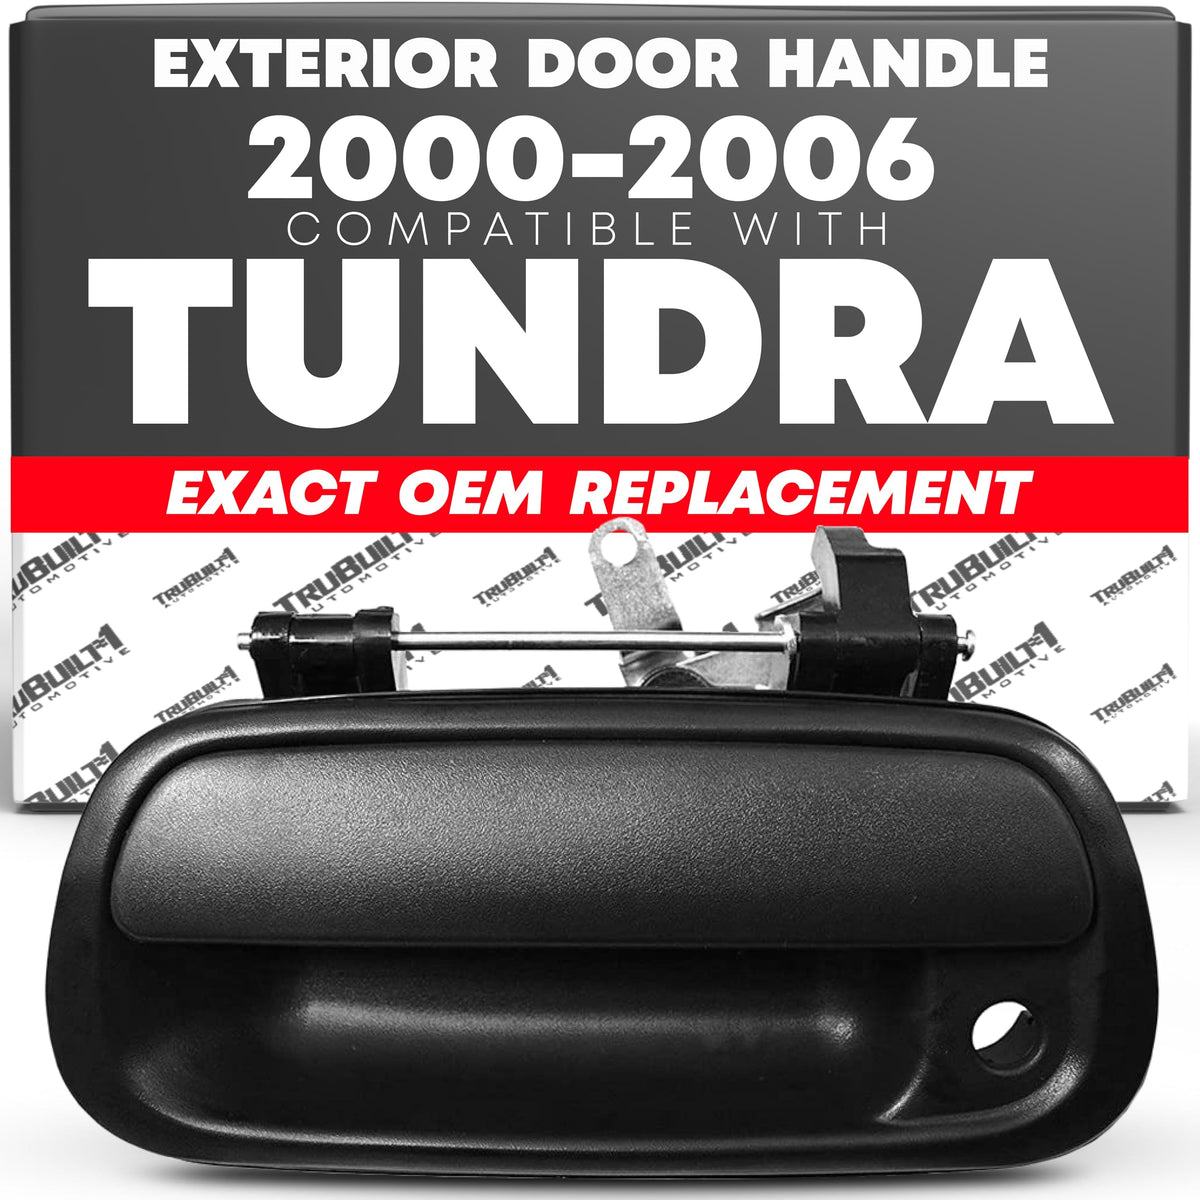 T1A TruBuilt 1 Automotive Tailgate Handle with Keyhole Compatible with 2000-2006 Toyota Tundra - Replaces 69090-0C030-C0, 69090-0C010